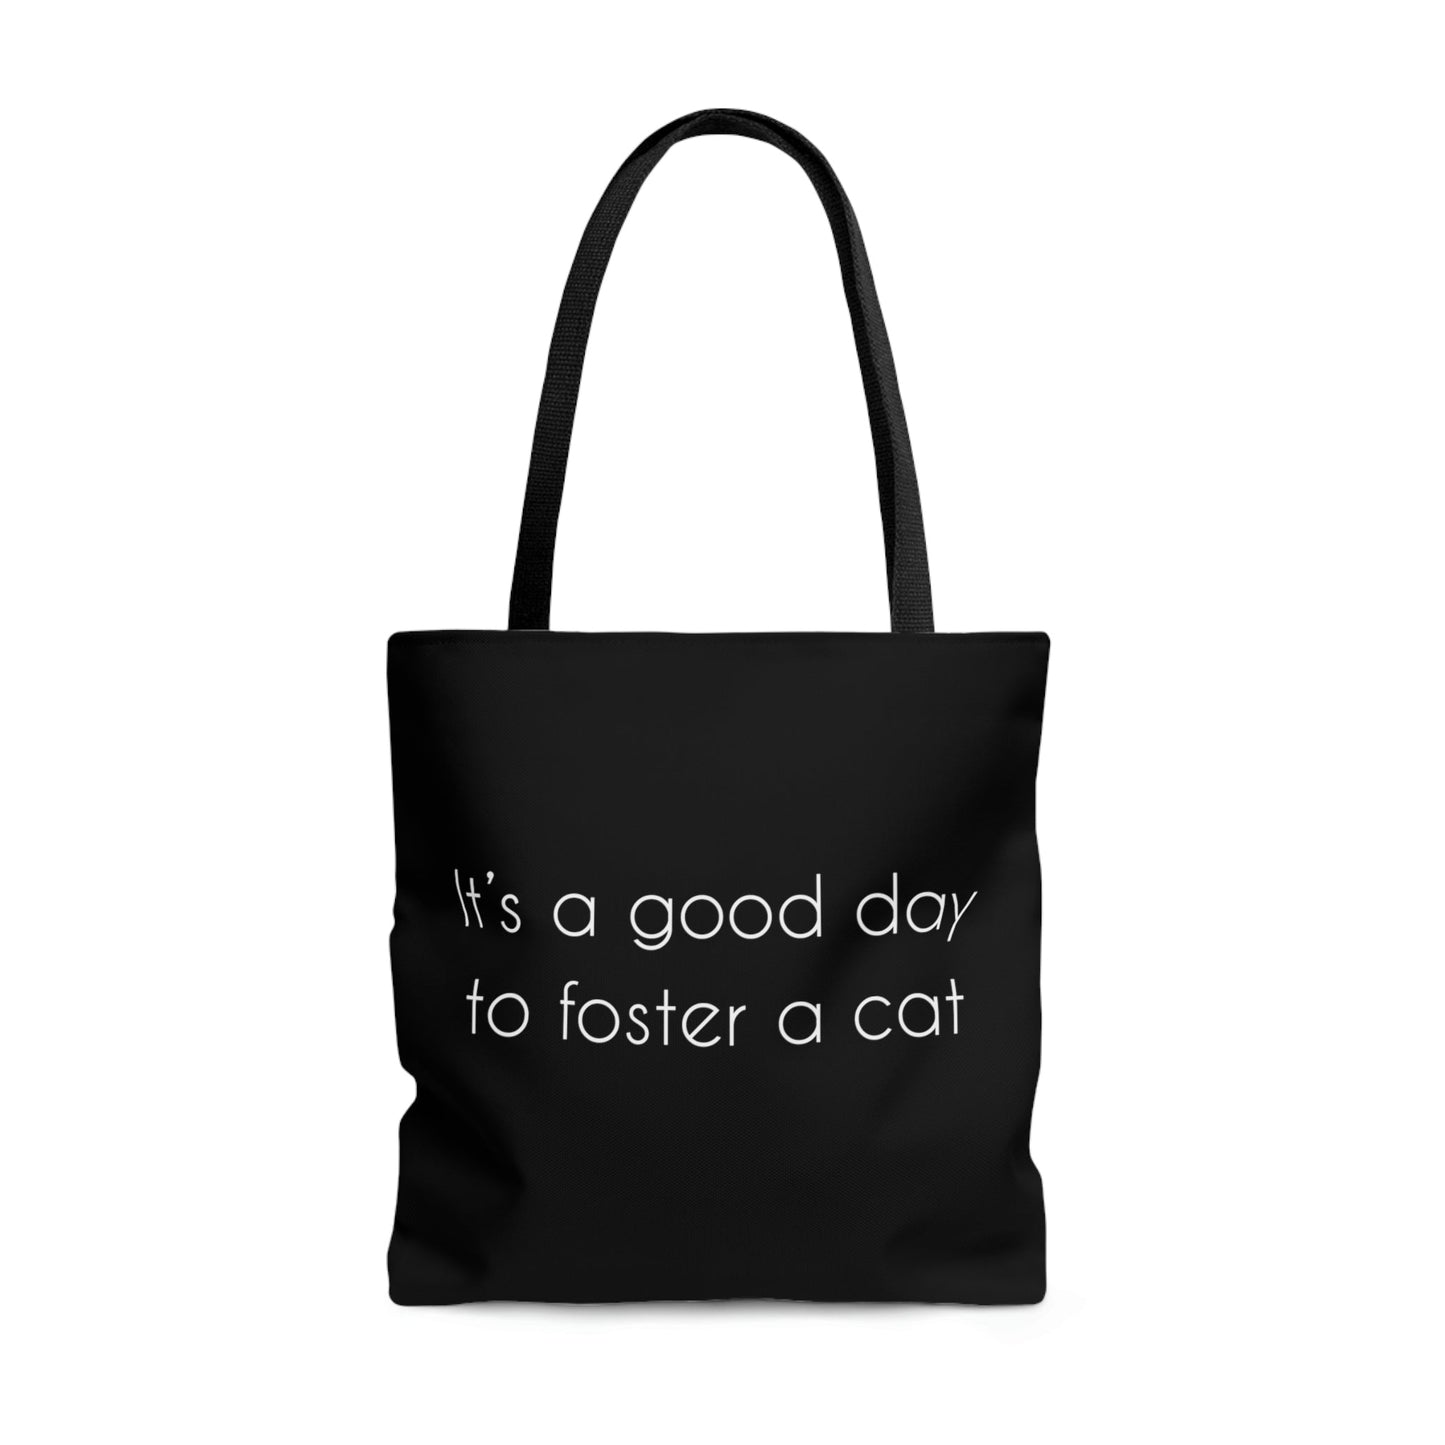 It's A Good Day To Foster A Cat | Tote Bag - Detezi Designs-36602280392540466584